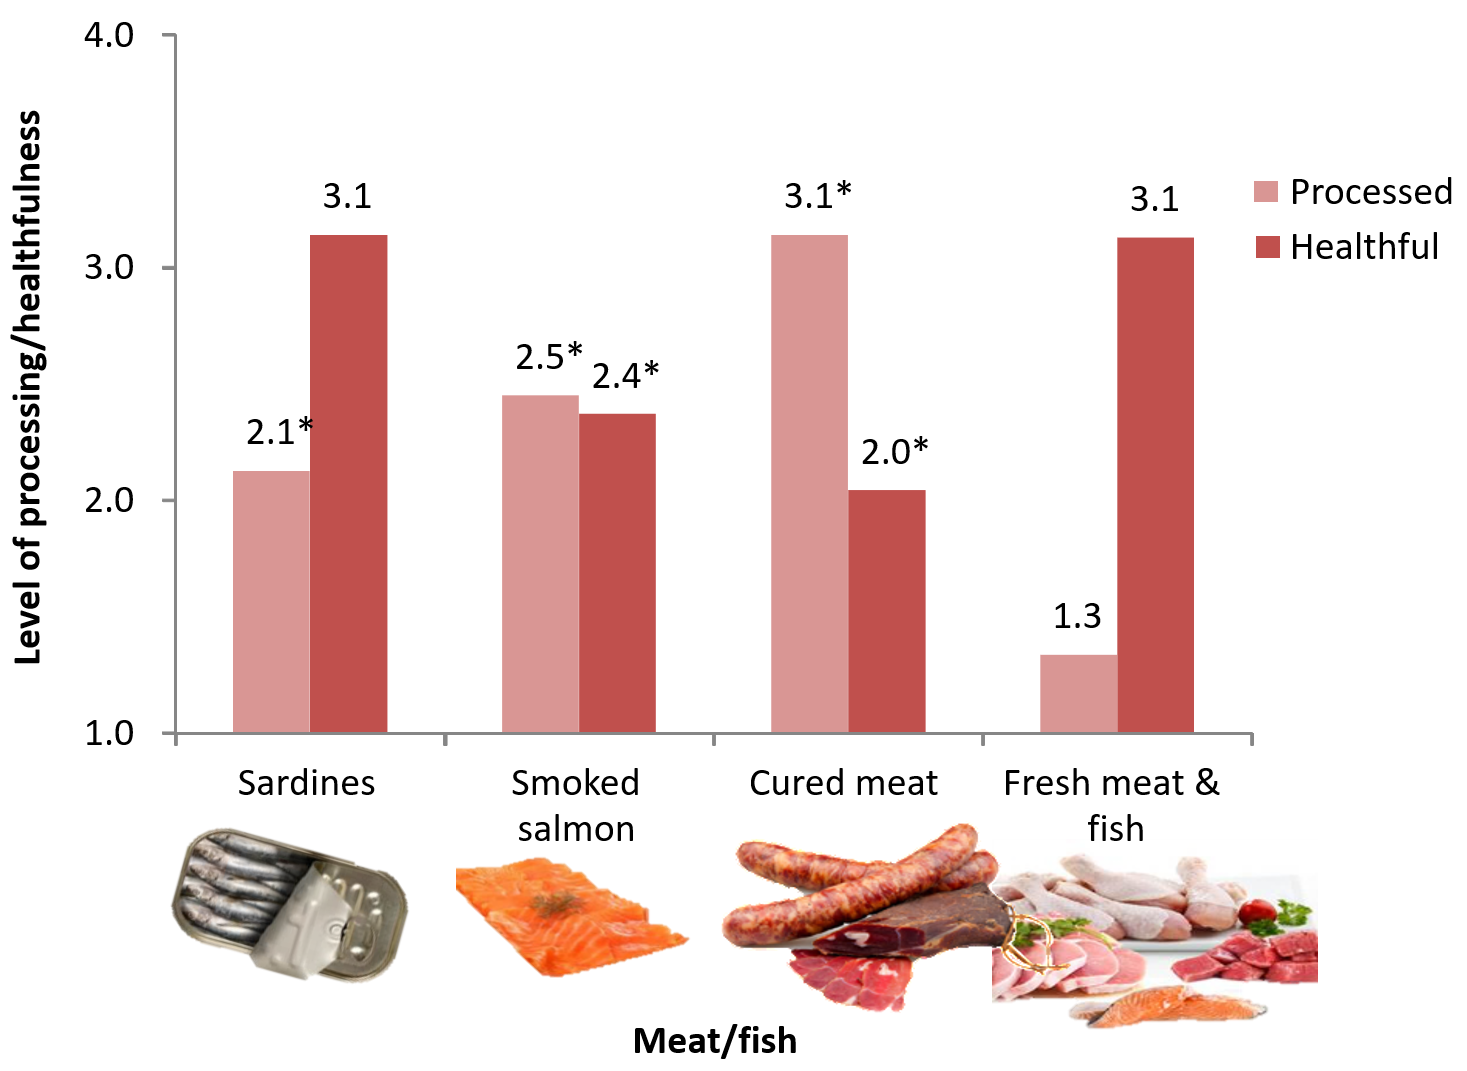 The third shows the level of processing/healthfulness on the y axis and four different meat/fish products on the x axis (sardines, smoked salmon, cured meat, fresh meat & fish). Cured meat has the highest processing score (3.1) and fresh meat/fish the lowest (1.3). Cured meat scored lowest in terms of healthfulness (2.0) and sardines and fresh meat & fish were equal highest (3.1). The other processing scores were sardines (2.1) and smoked salmon (2.5). The other healthfulness score was smoked salmon (2.4)